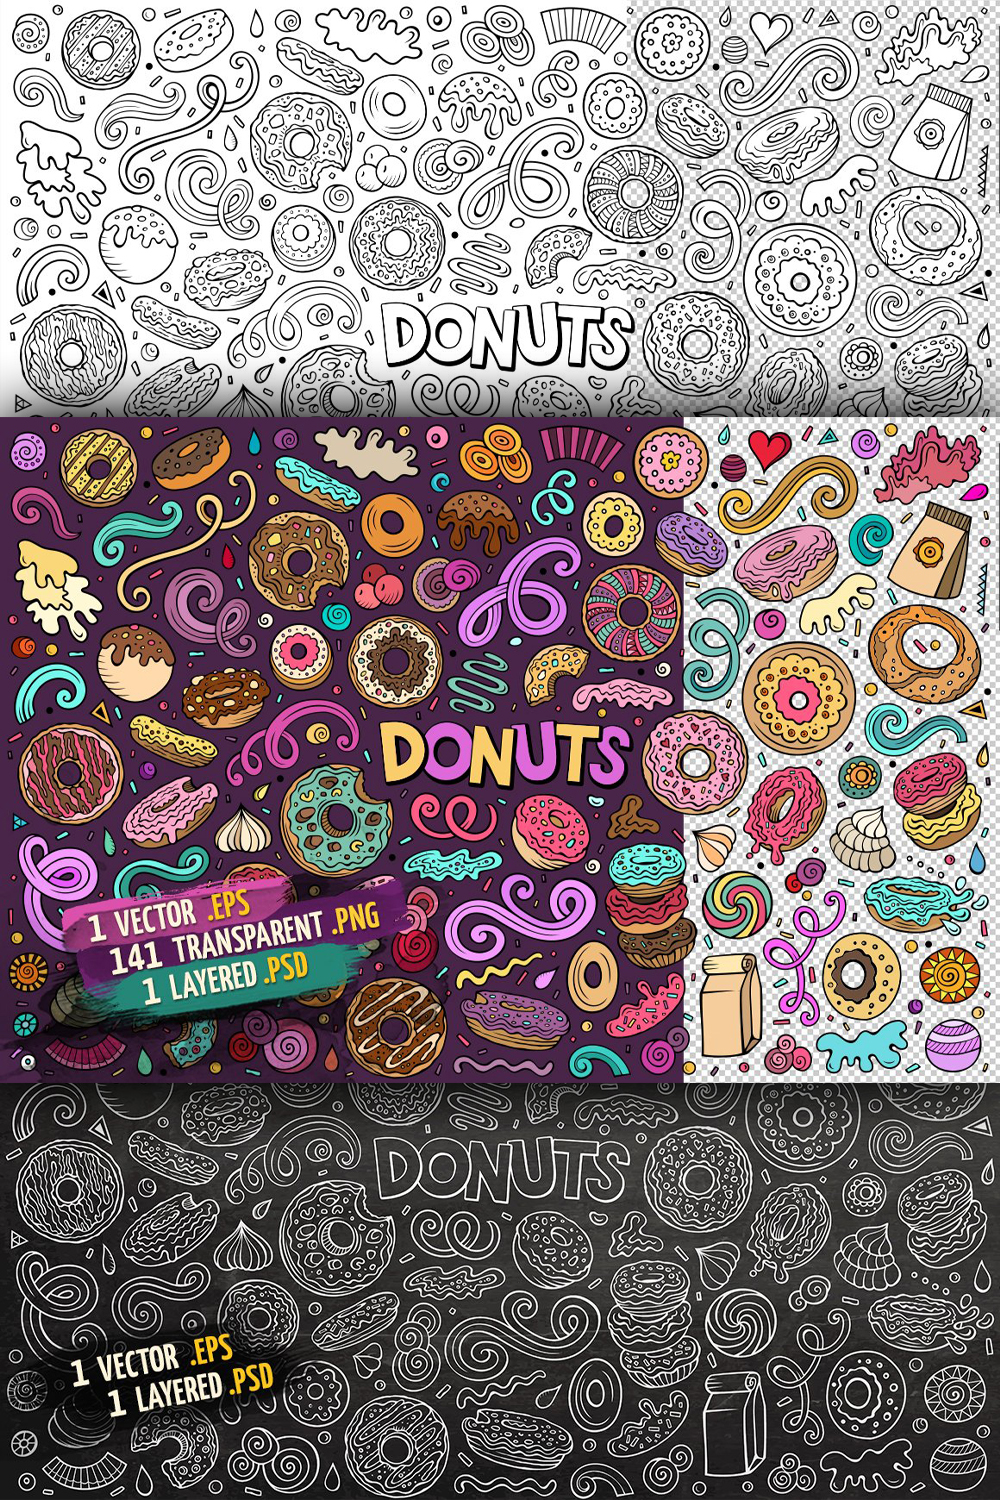 Donuts objects pinterest.